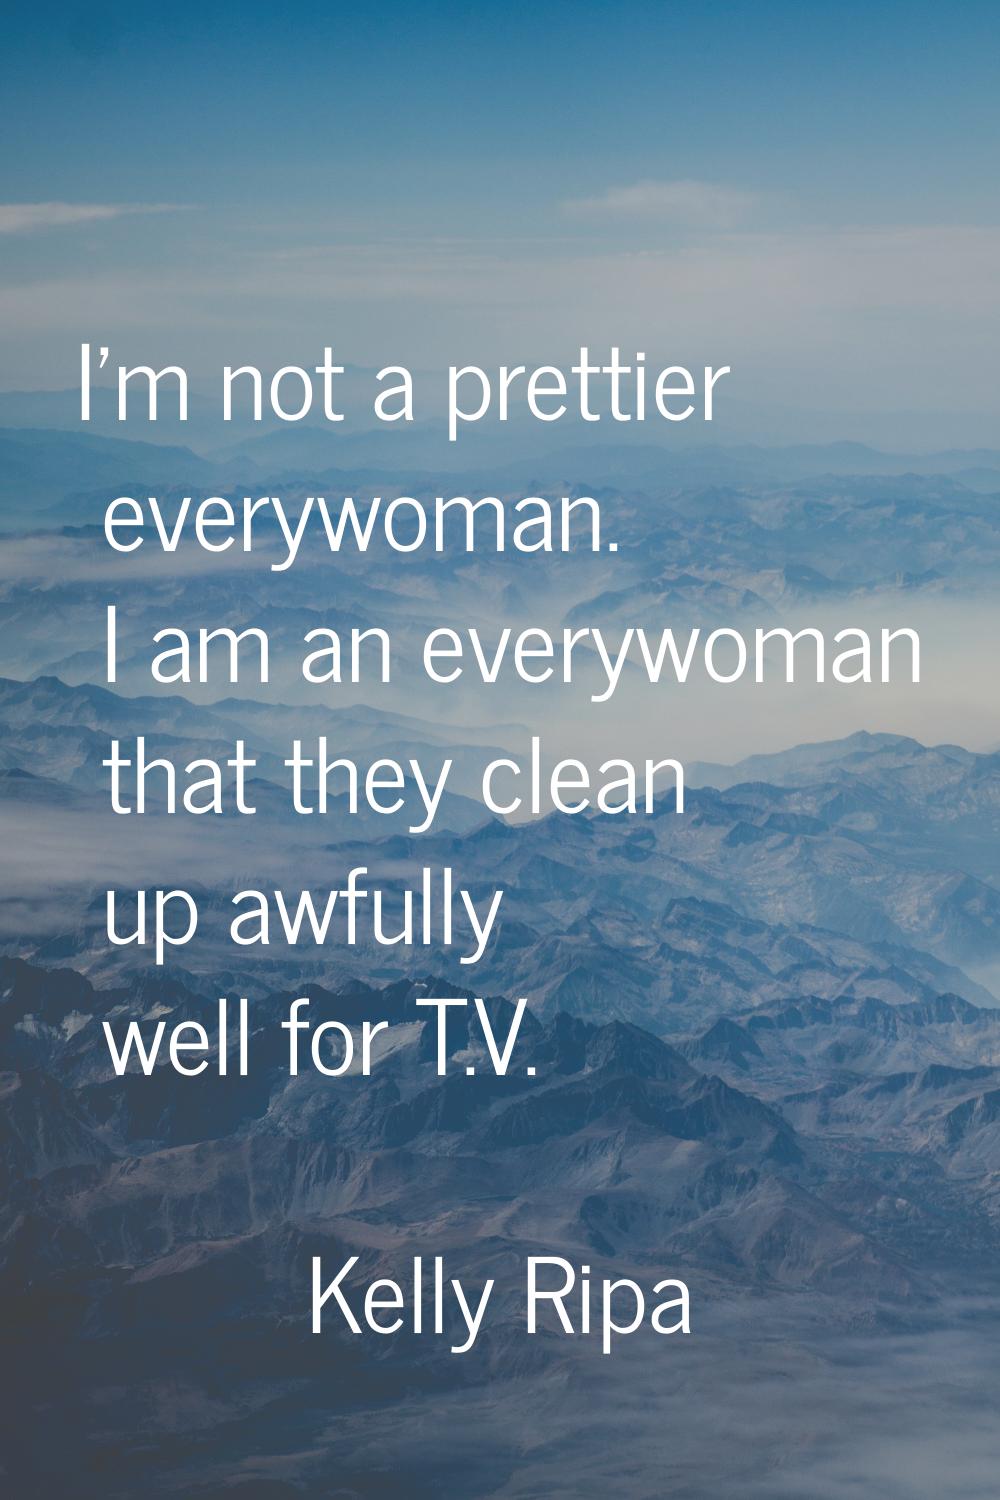 I'm not a prettier everywoman. I am an everywoman that they clean up awfully well for T.V.